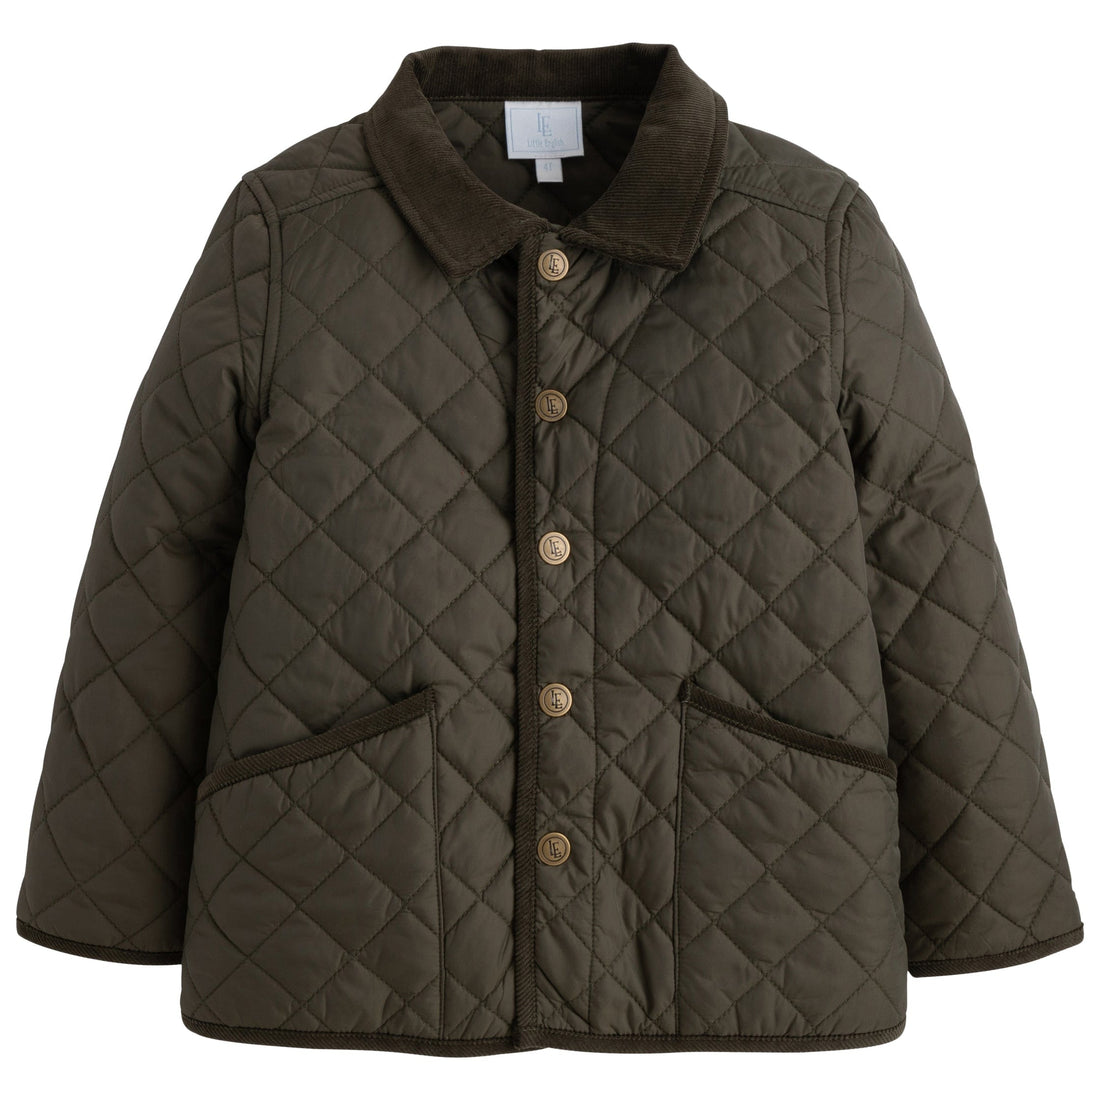 Little English classic childrens clothing unisex button snap quilted jacket in olive green